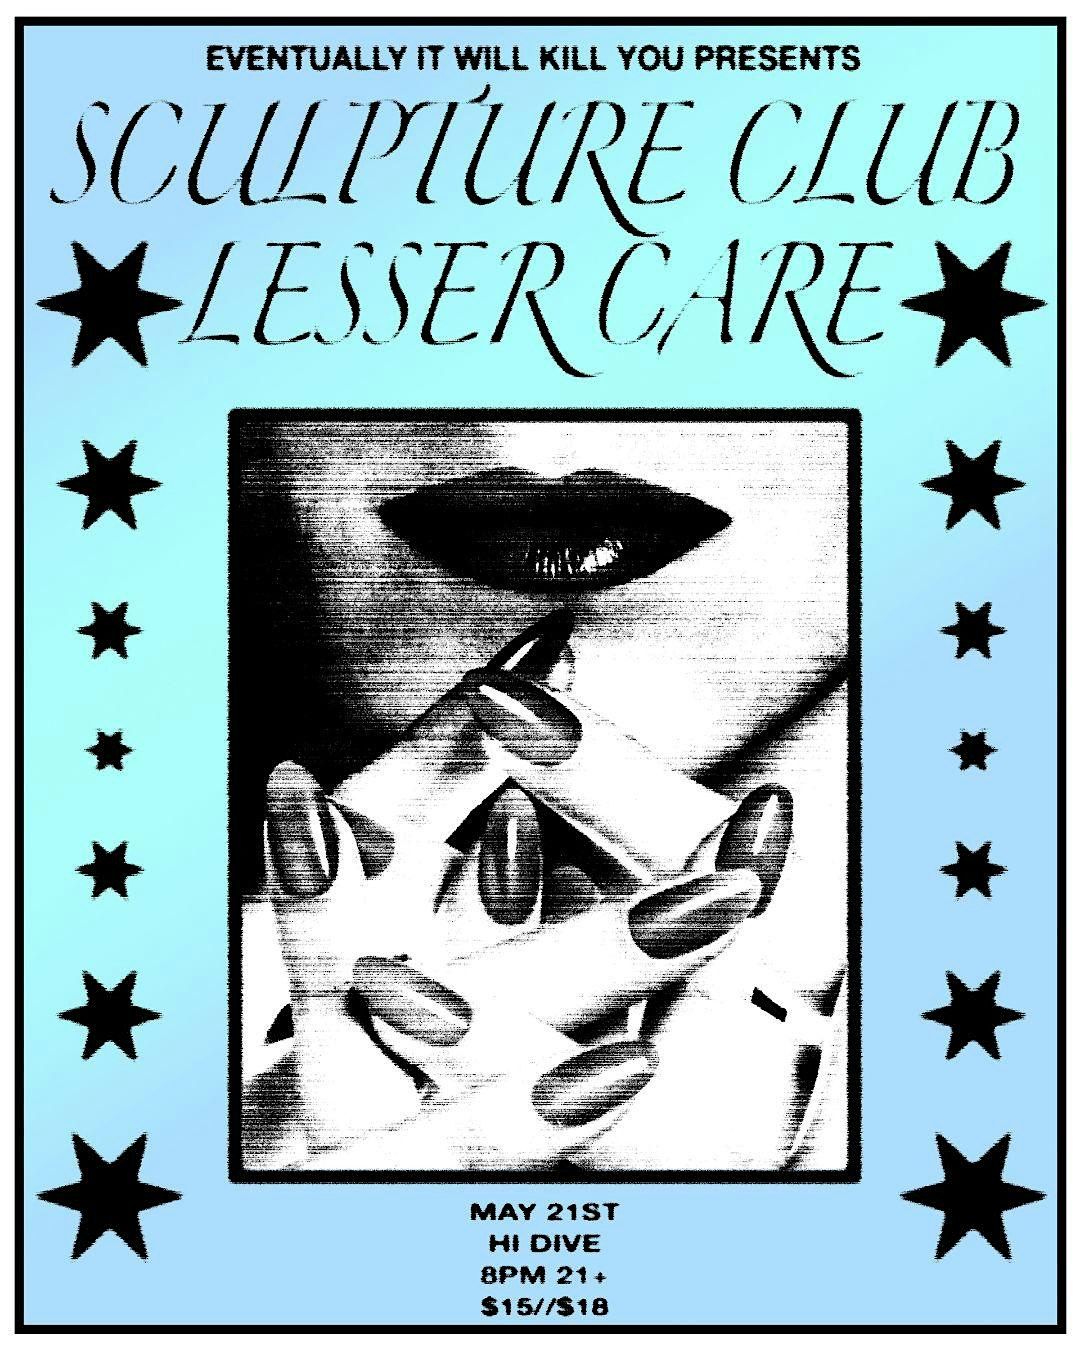 Sculpture Club with Lesser Care